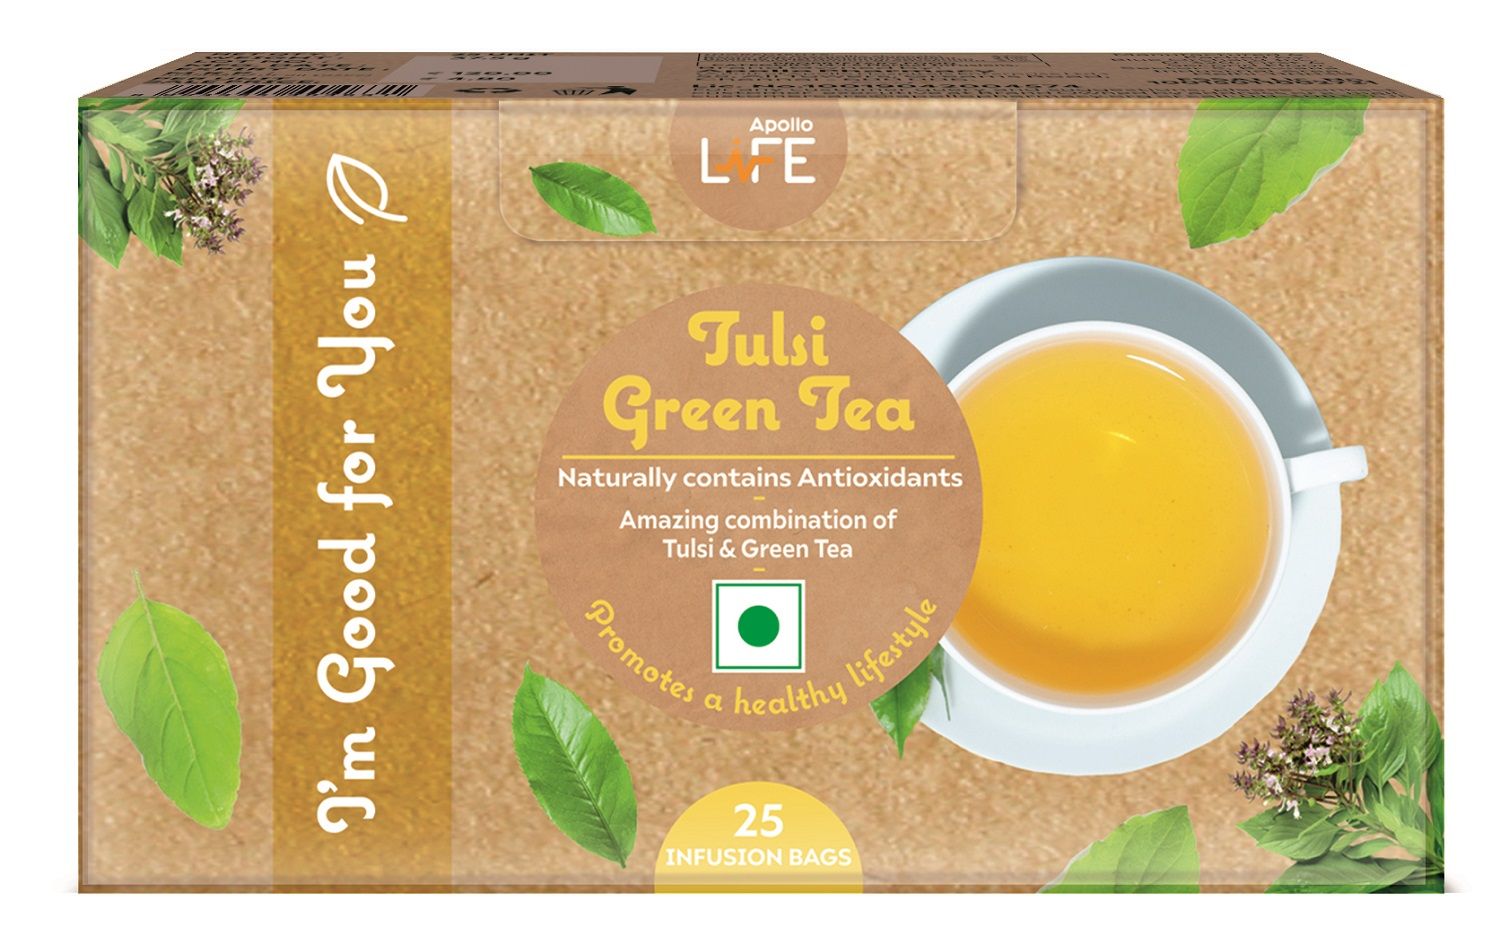 Buy Apollo Life Tulsi Green Tea Infusion Bags, 25 Count Online